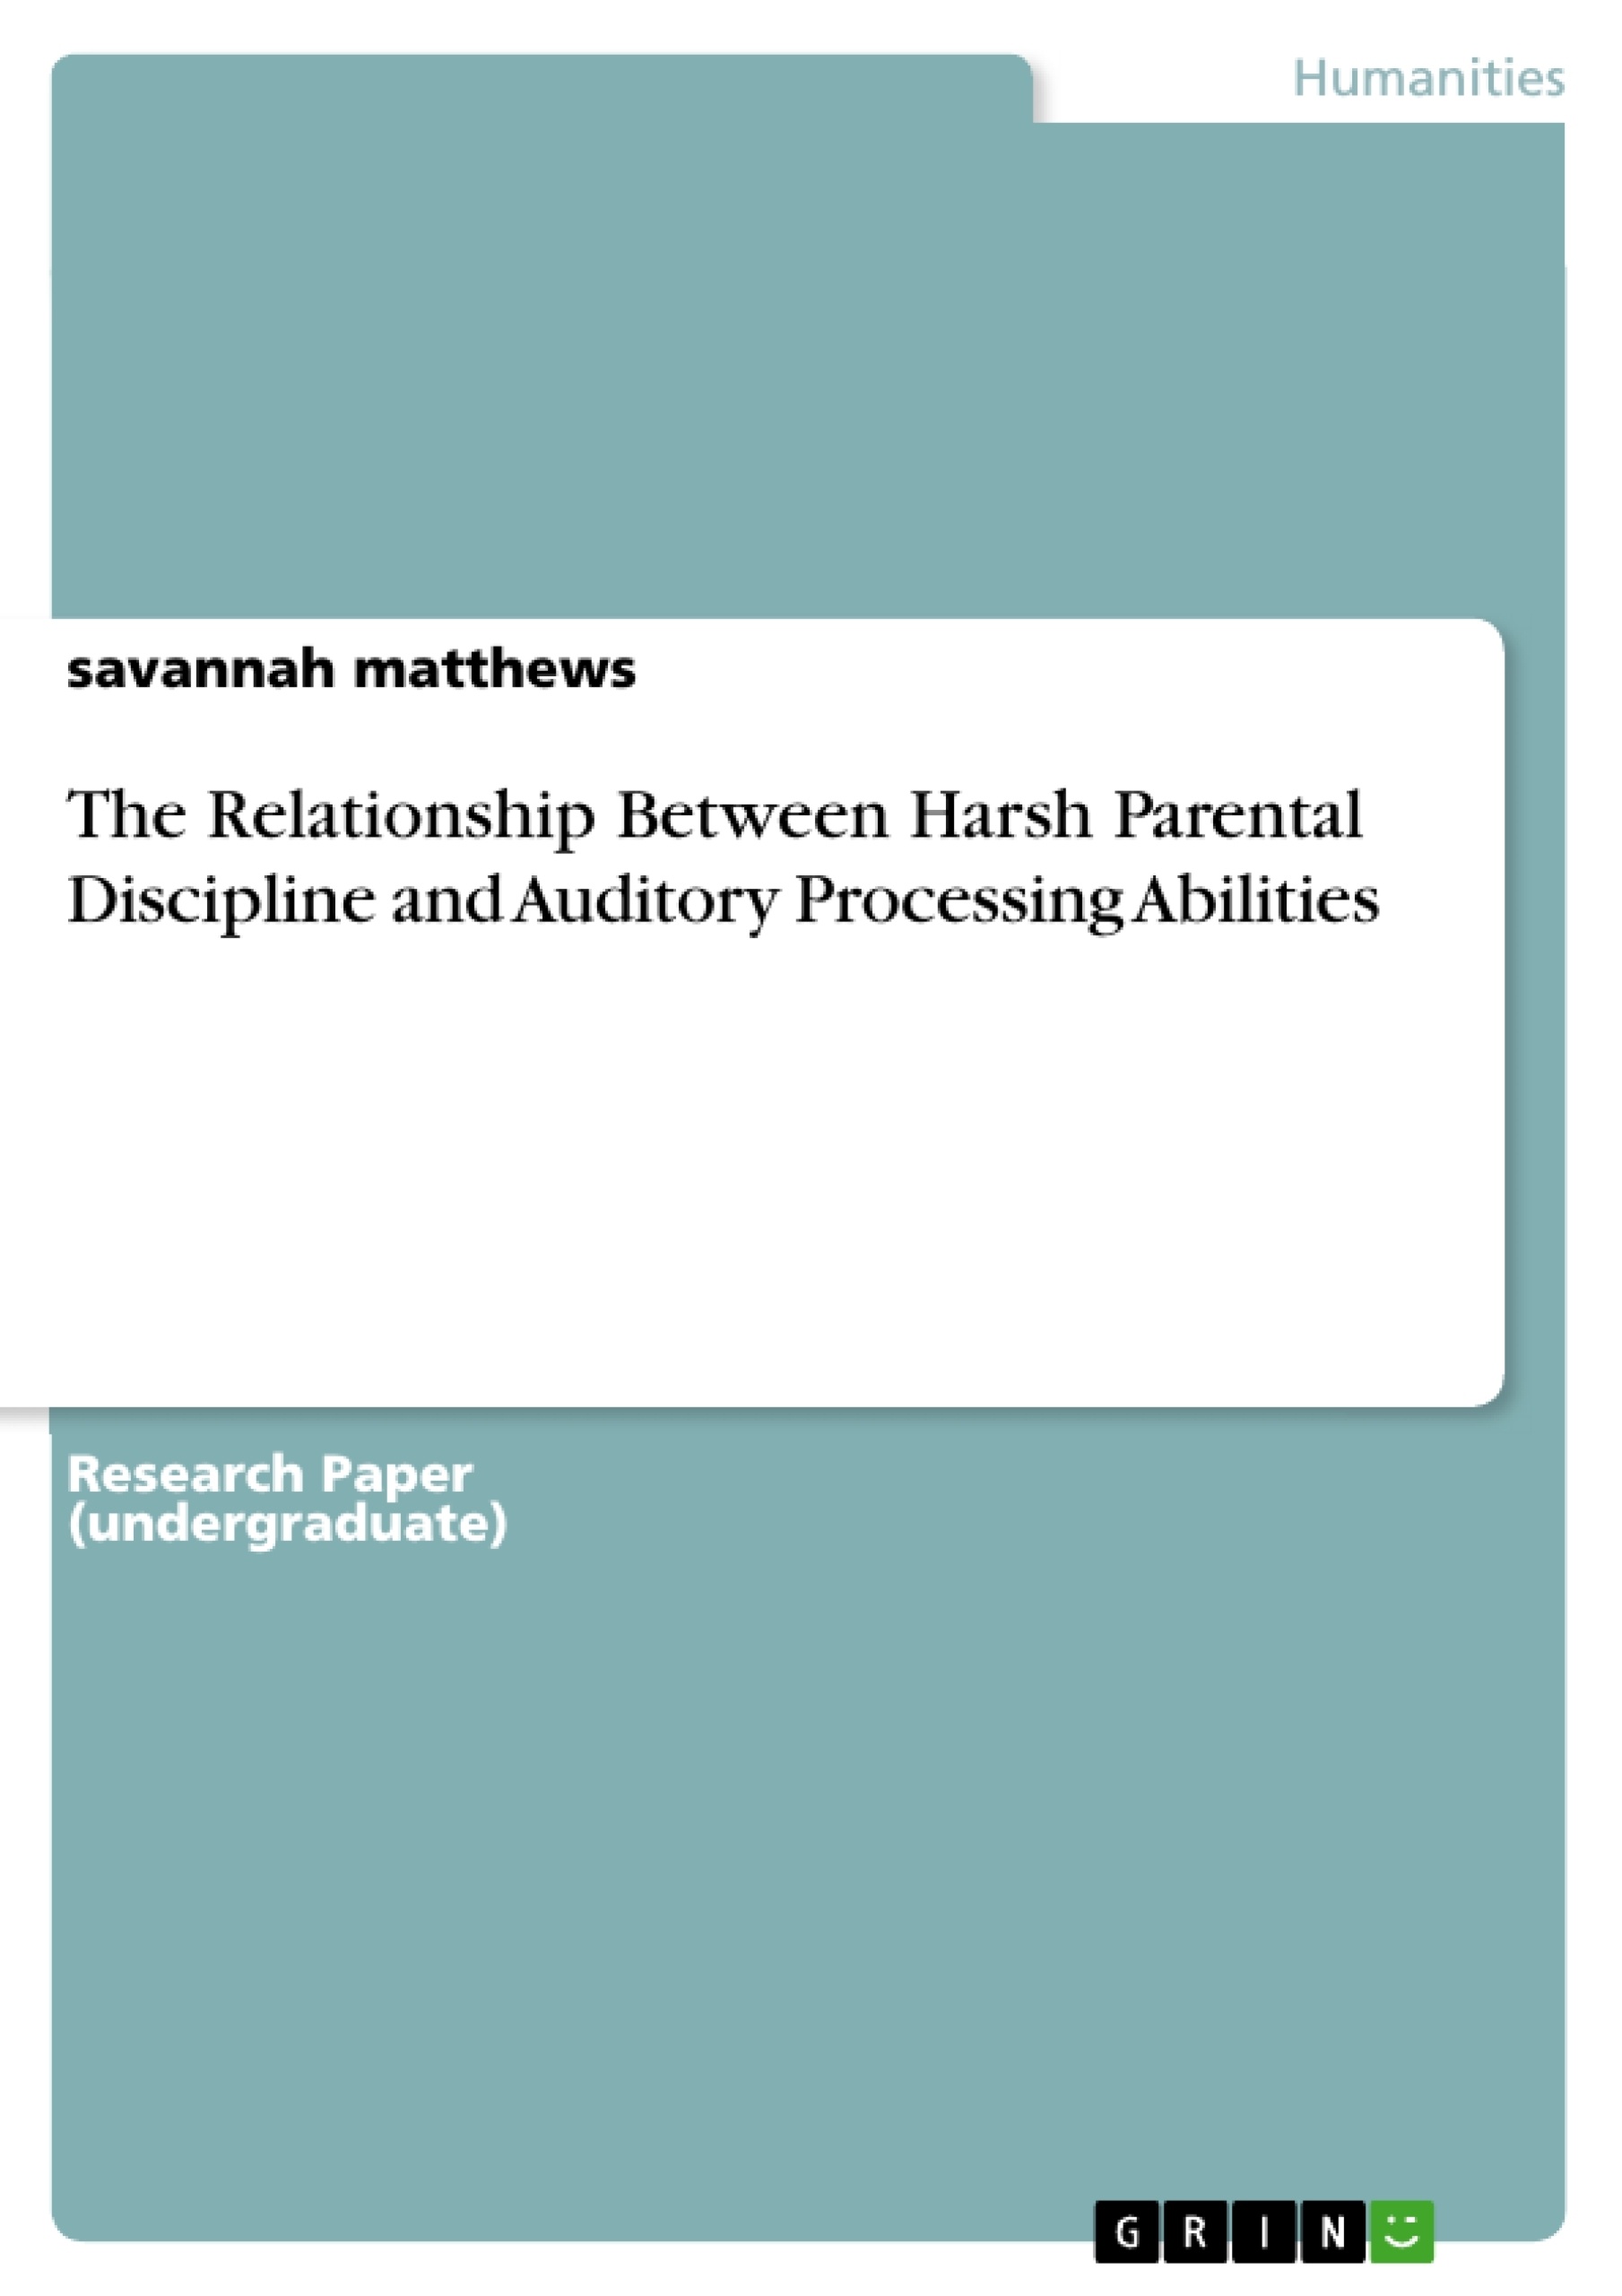 Título: The Relationship Between Harsh Parental Discipline and Auditory Processing Abilities